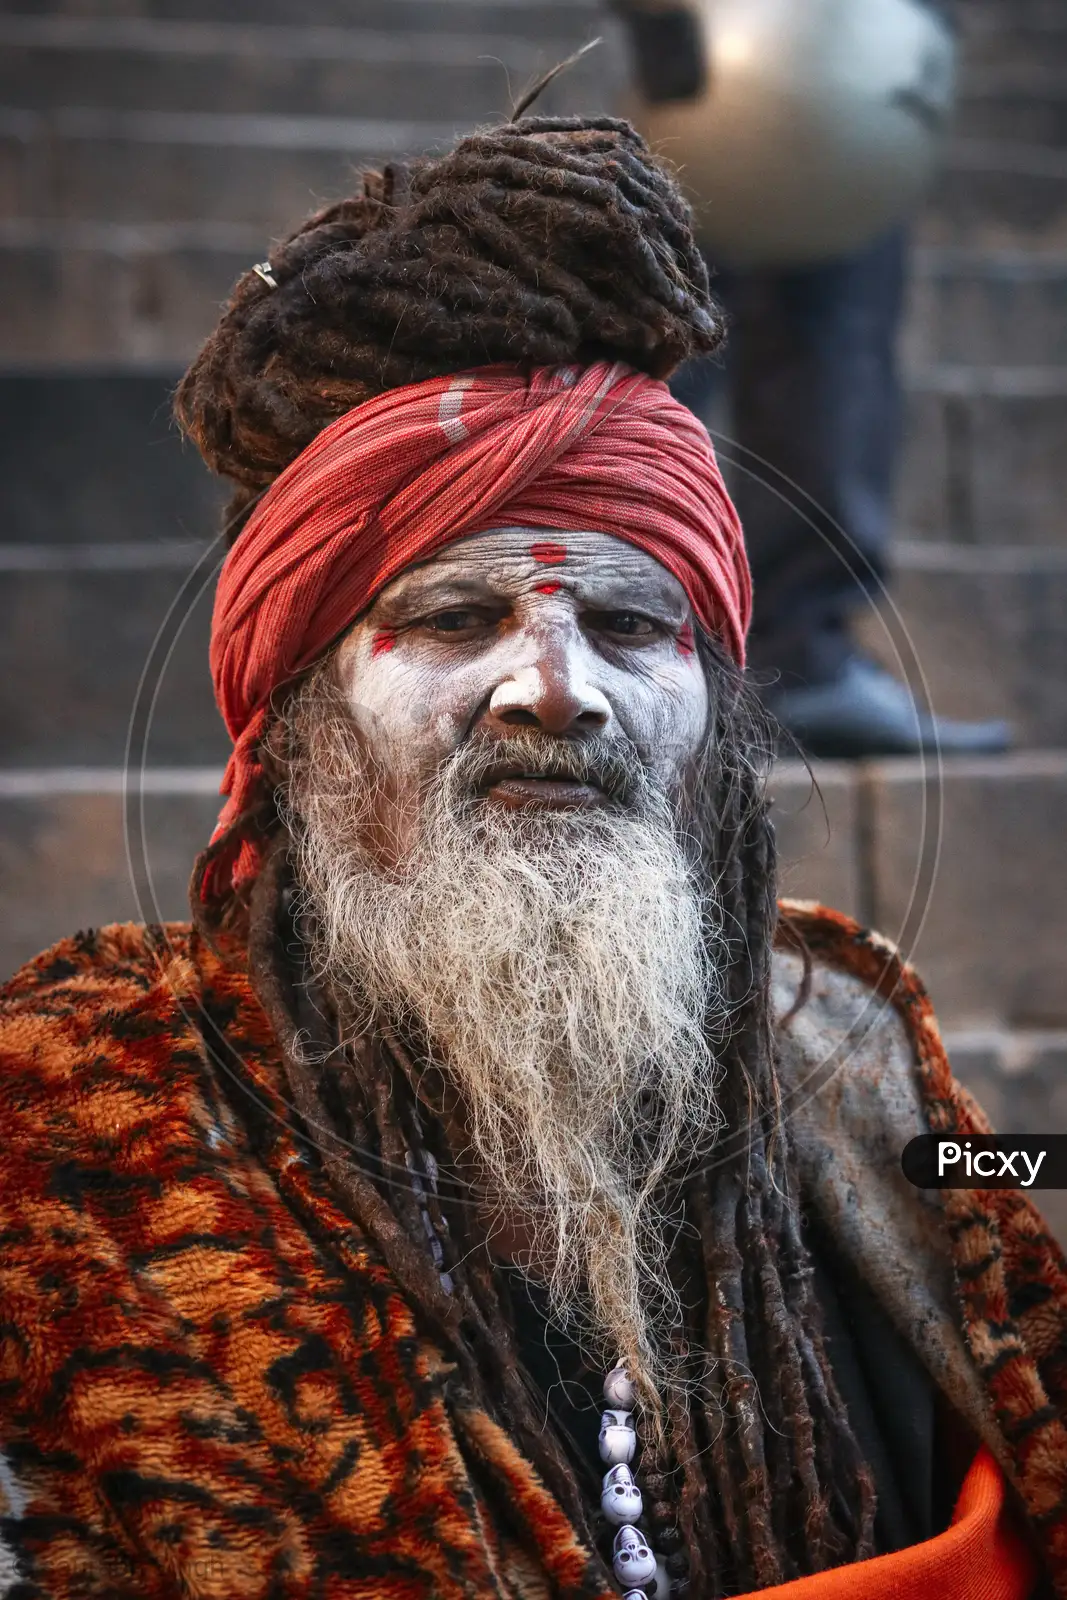 Meditation. Portrait of a Young Bearded Man in a Turban Stock Image - Image  of sadhana, relaxation: 70527563